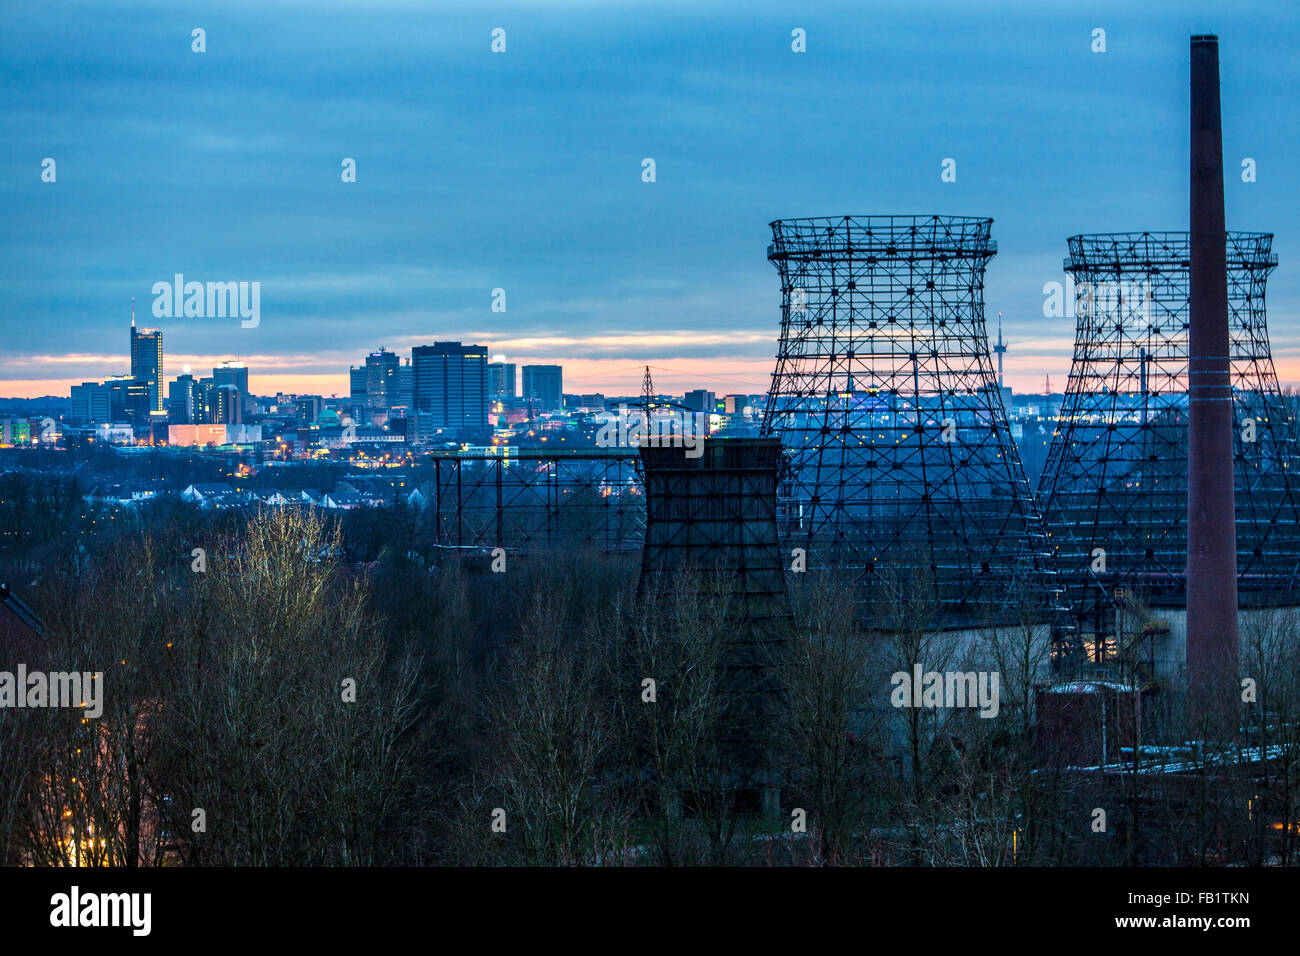 Skyline of the city of Essen, Germany, business district, city center, old cooling tower steel skeleton at Zeche Zollverein, Stock Photo